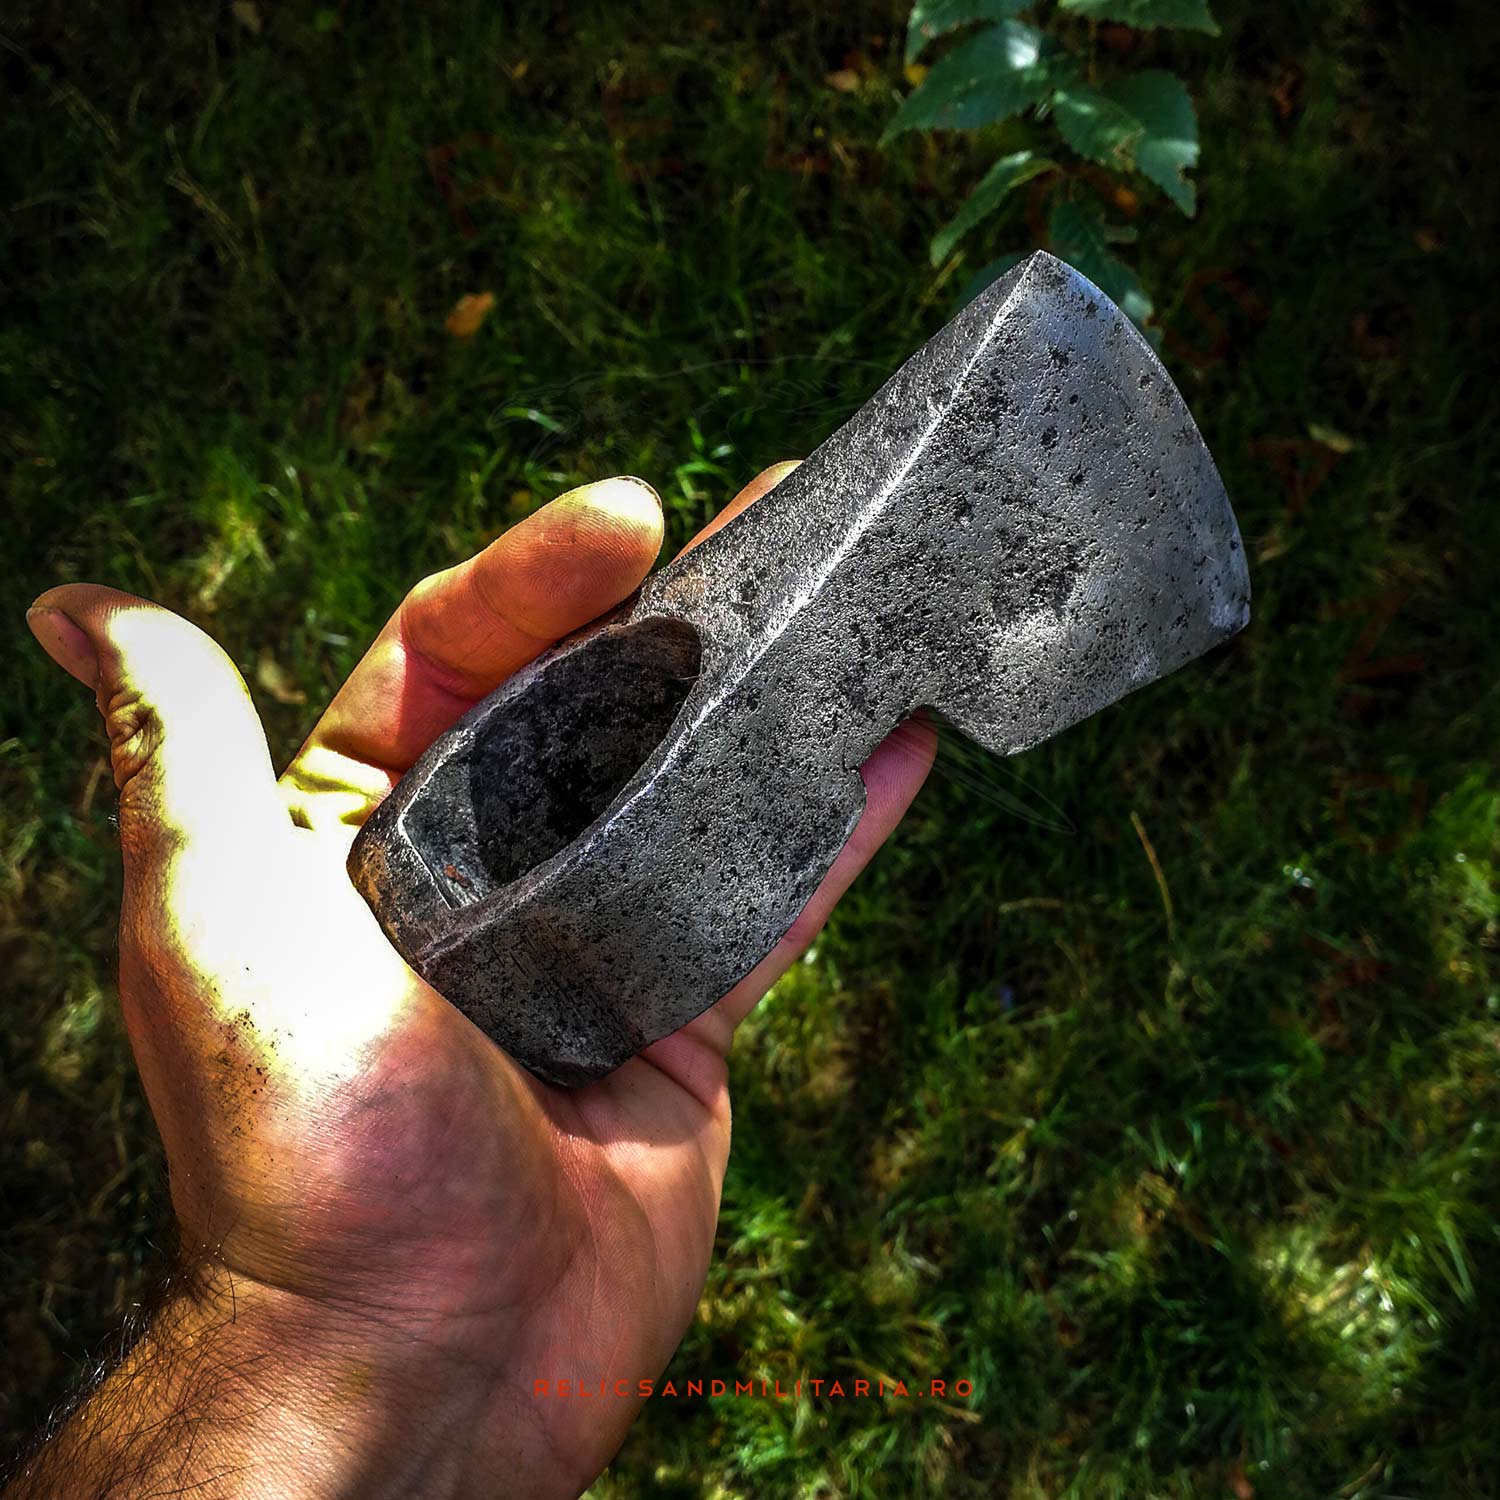 Restoring an old axe head found in the forest while metal detecting